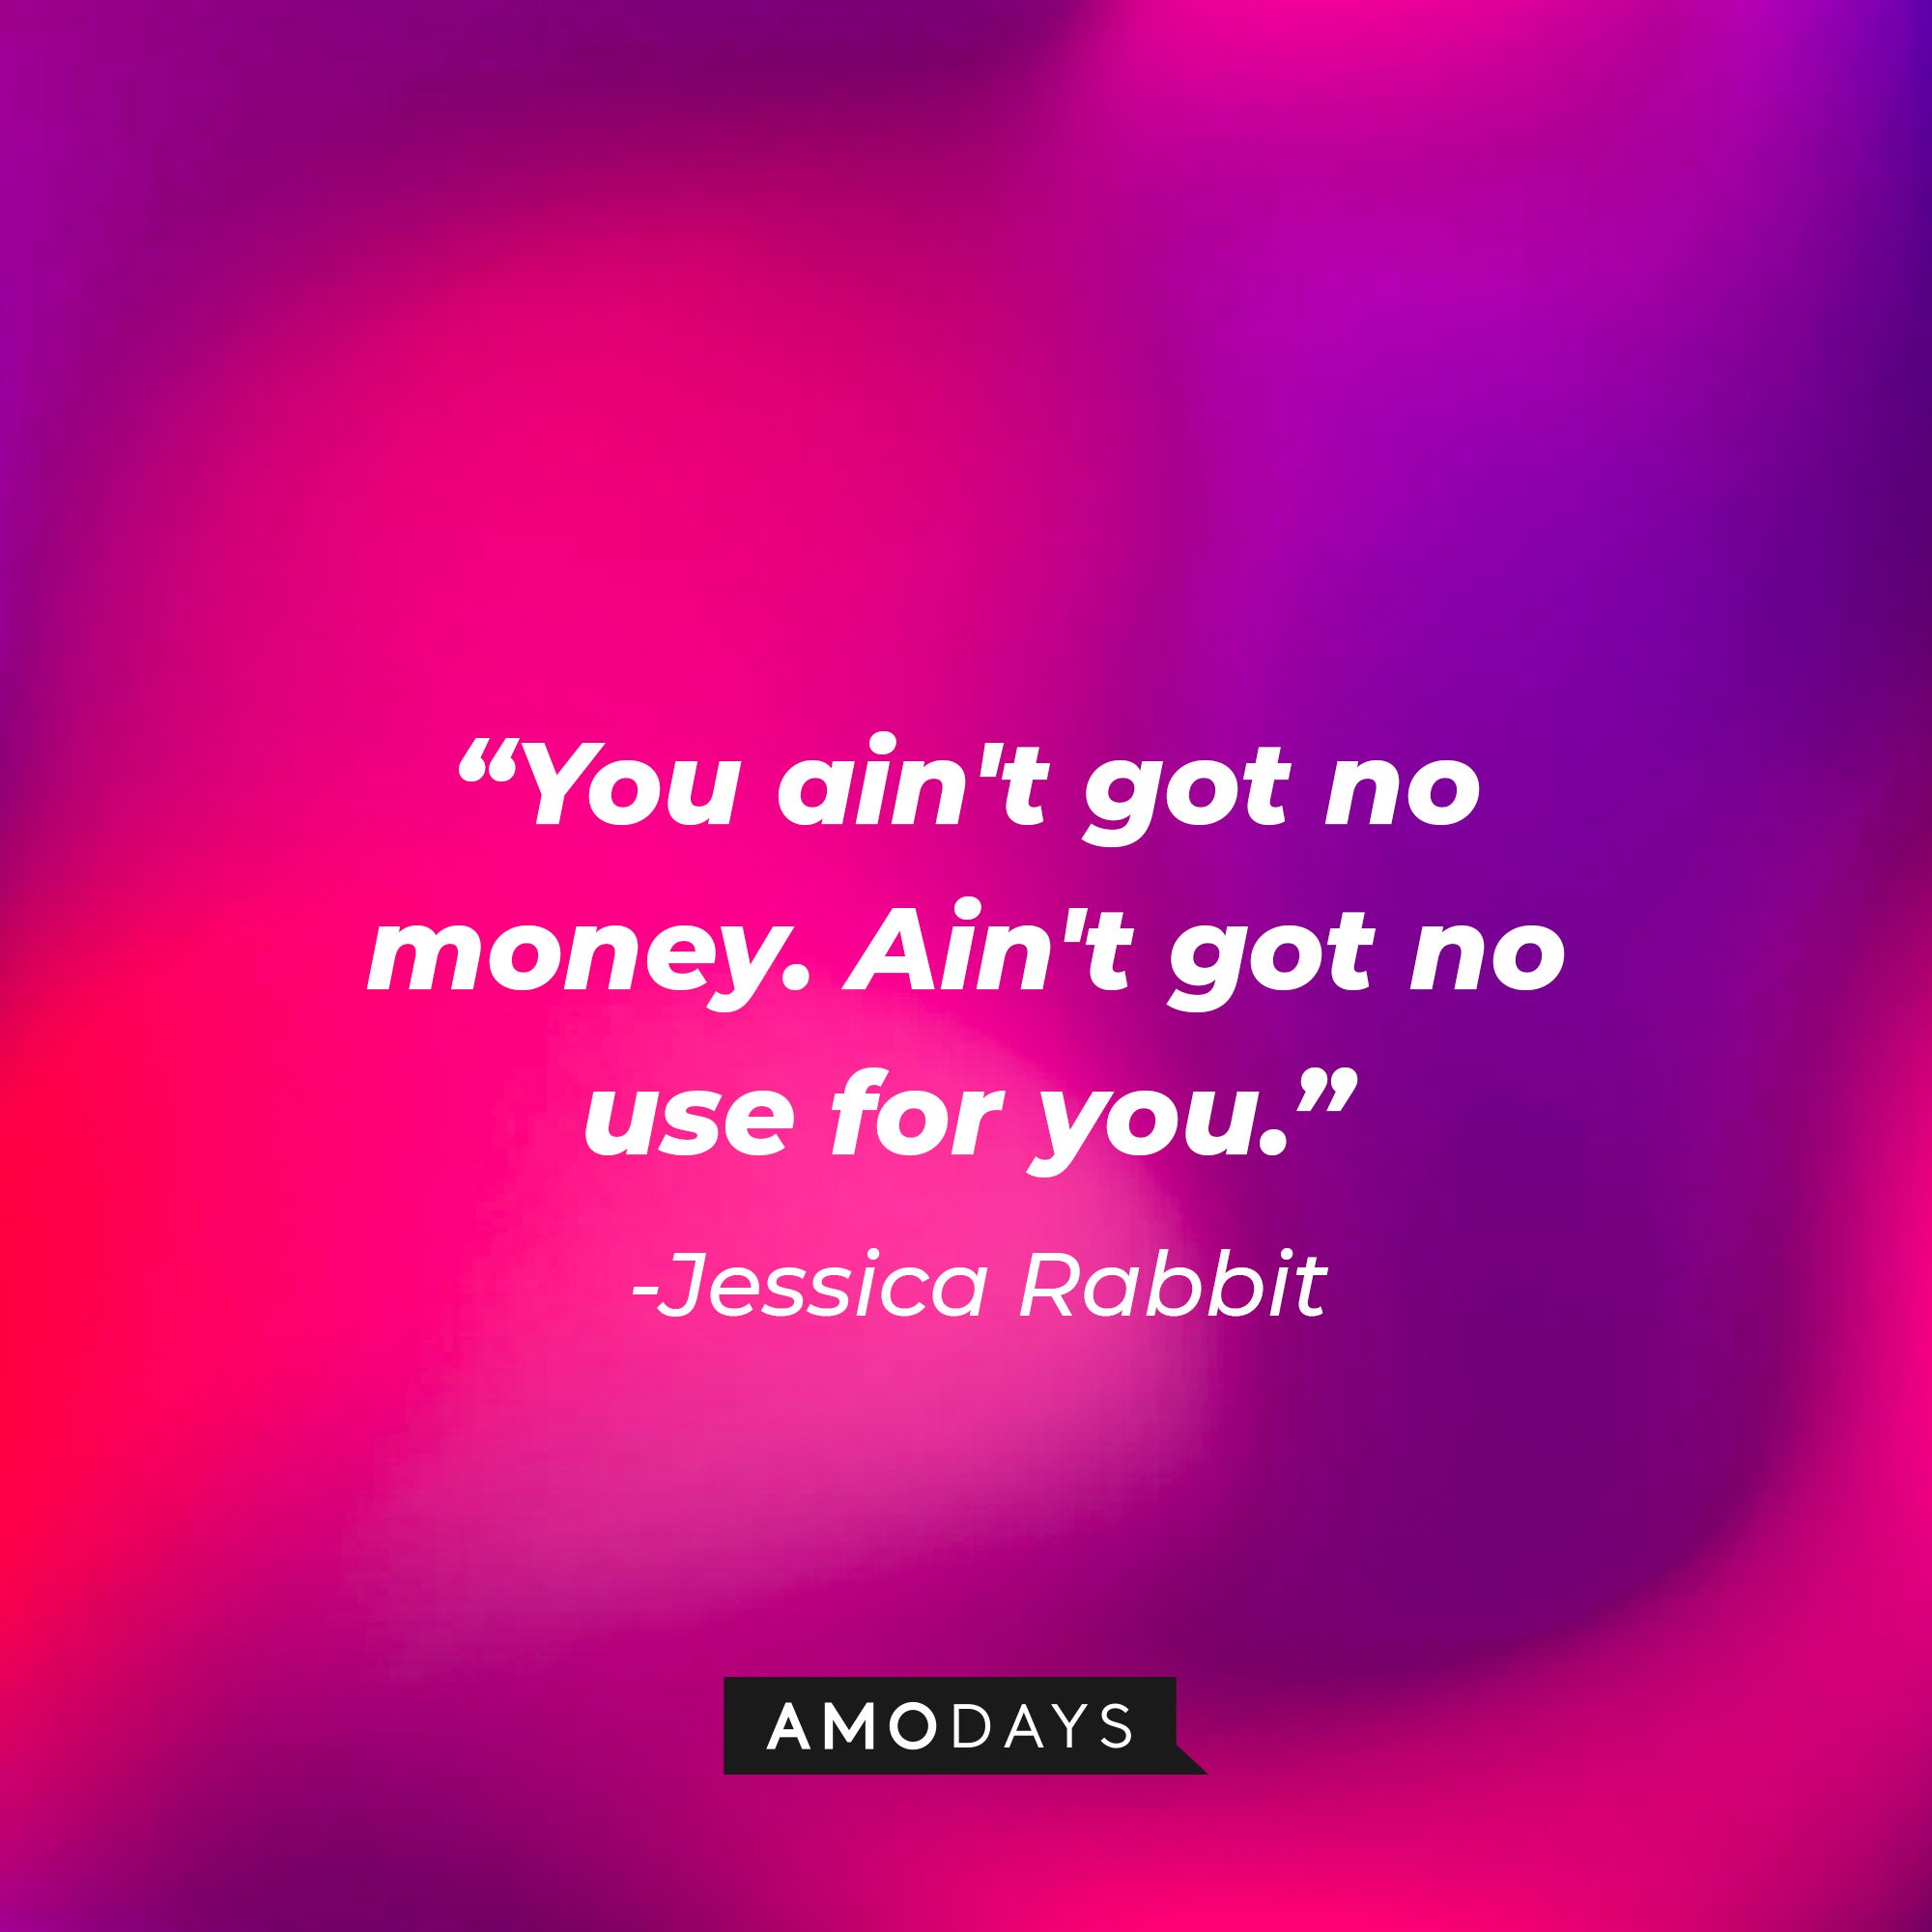 Jessica Rabbit’s quote: "You ain't got no money.  Ain't got no use for you." | Image: AmoDays